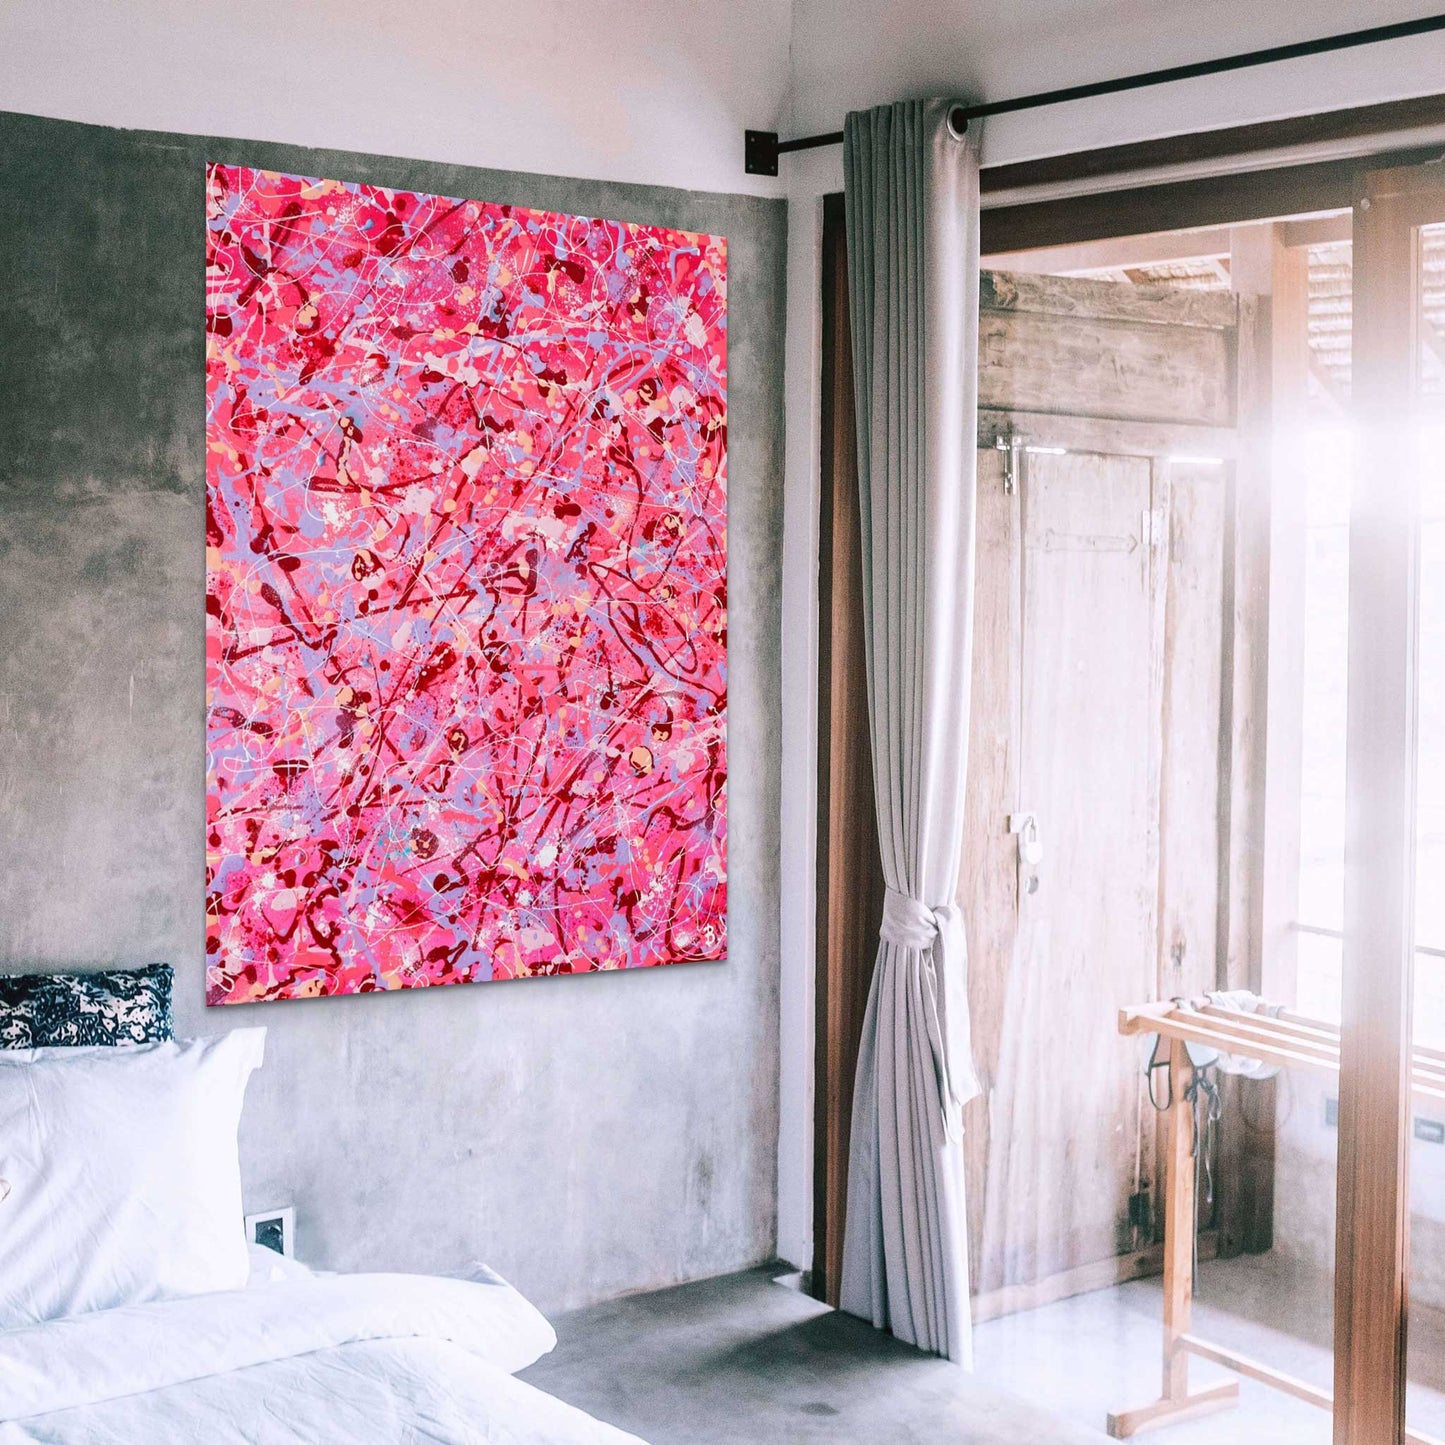 'Self Love' large, original abstract painting seen hanging in modern bedroom. Painted by Bridget Bradley to celebrate love of self on Valentine's Day